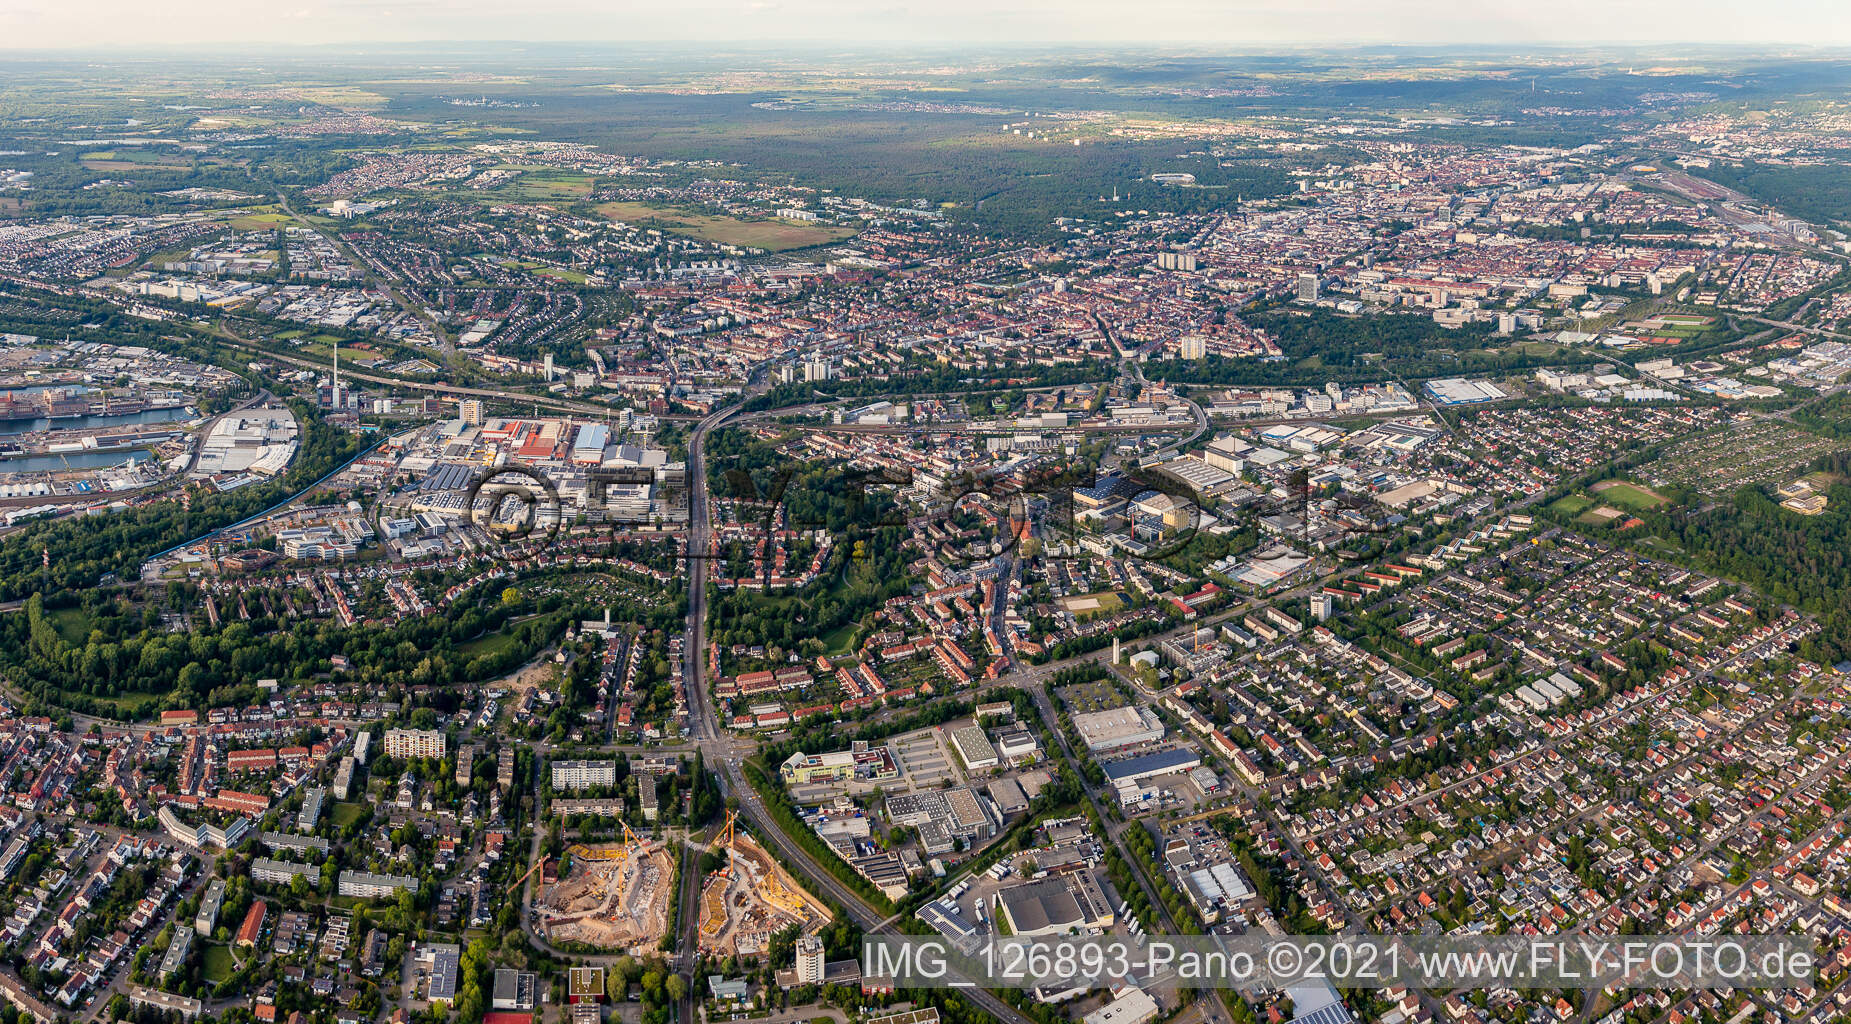 District Grünwinkel in Karlsruhe in the state Baden-Wuerttemberg, Germany from above